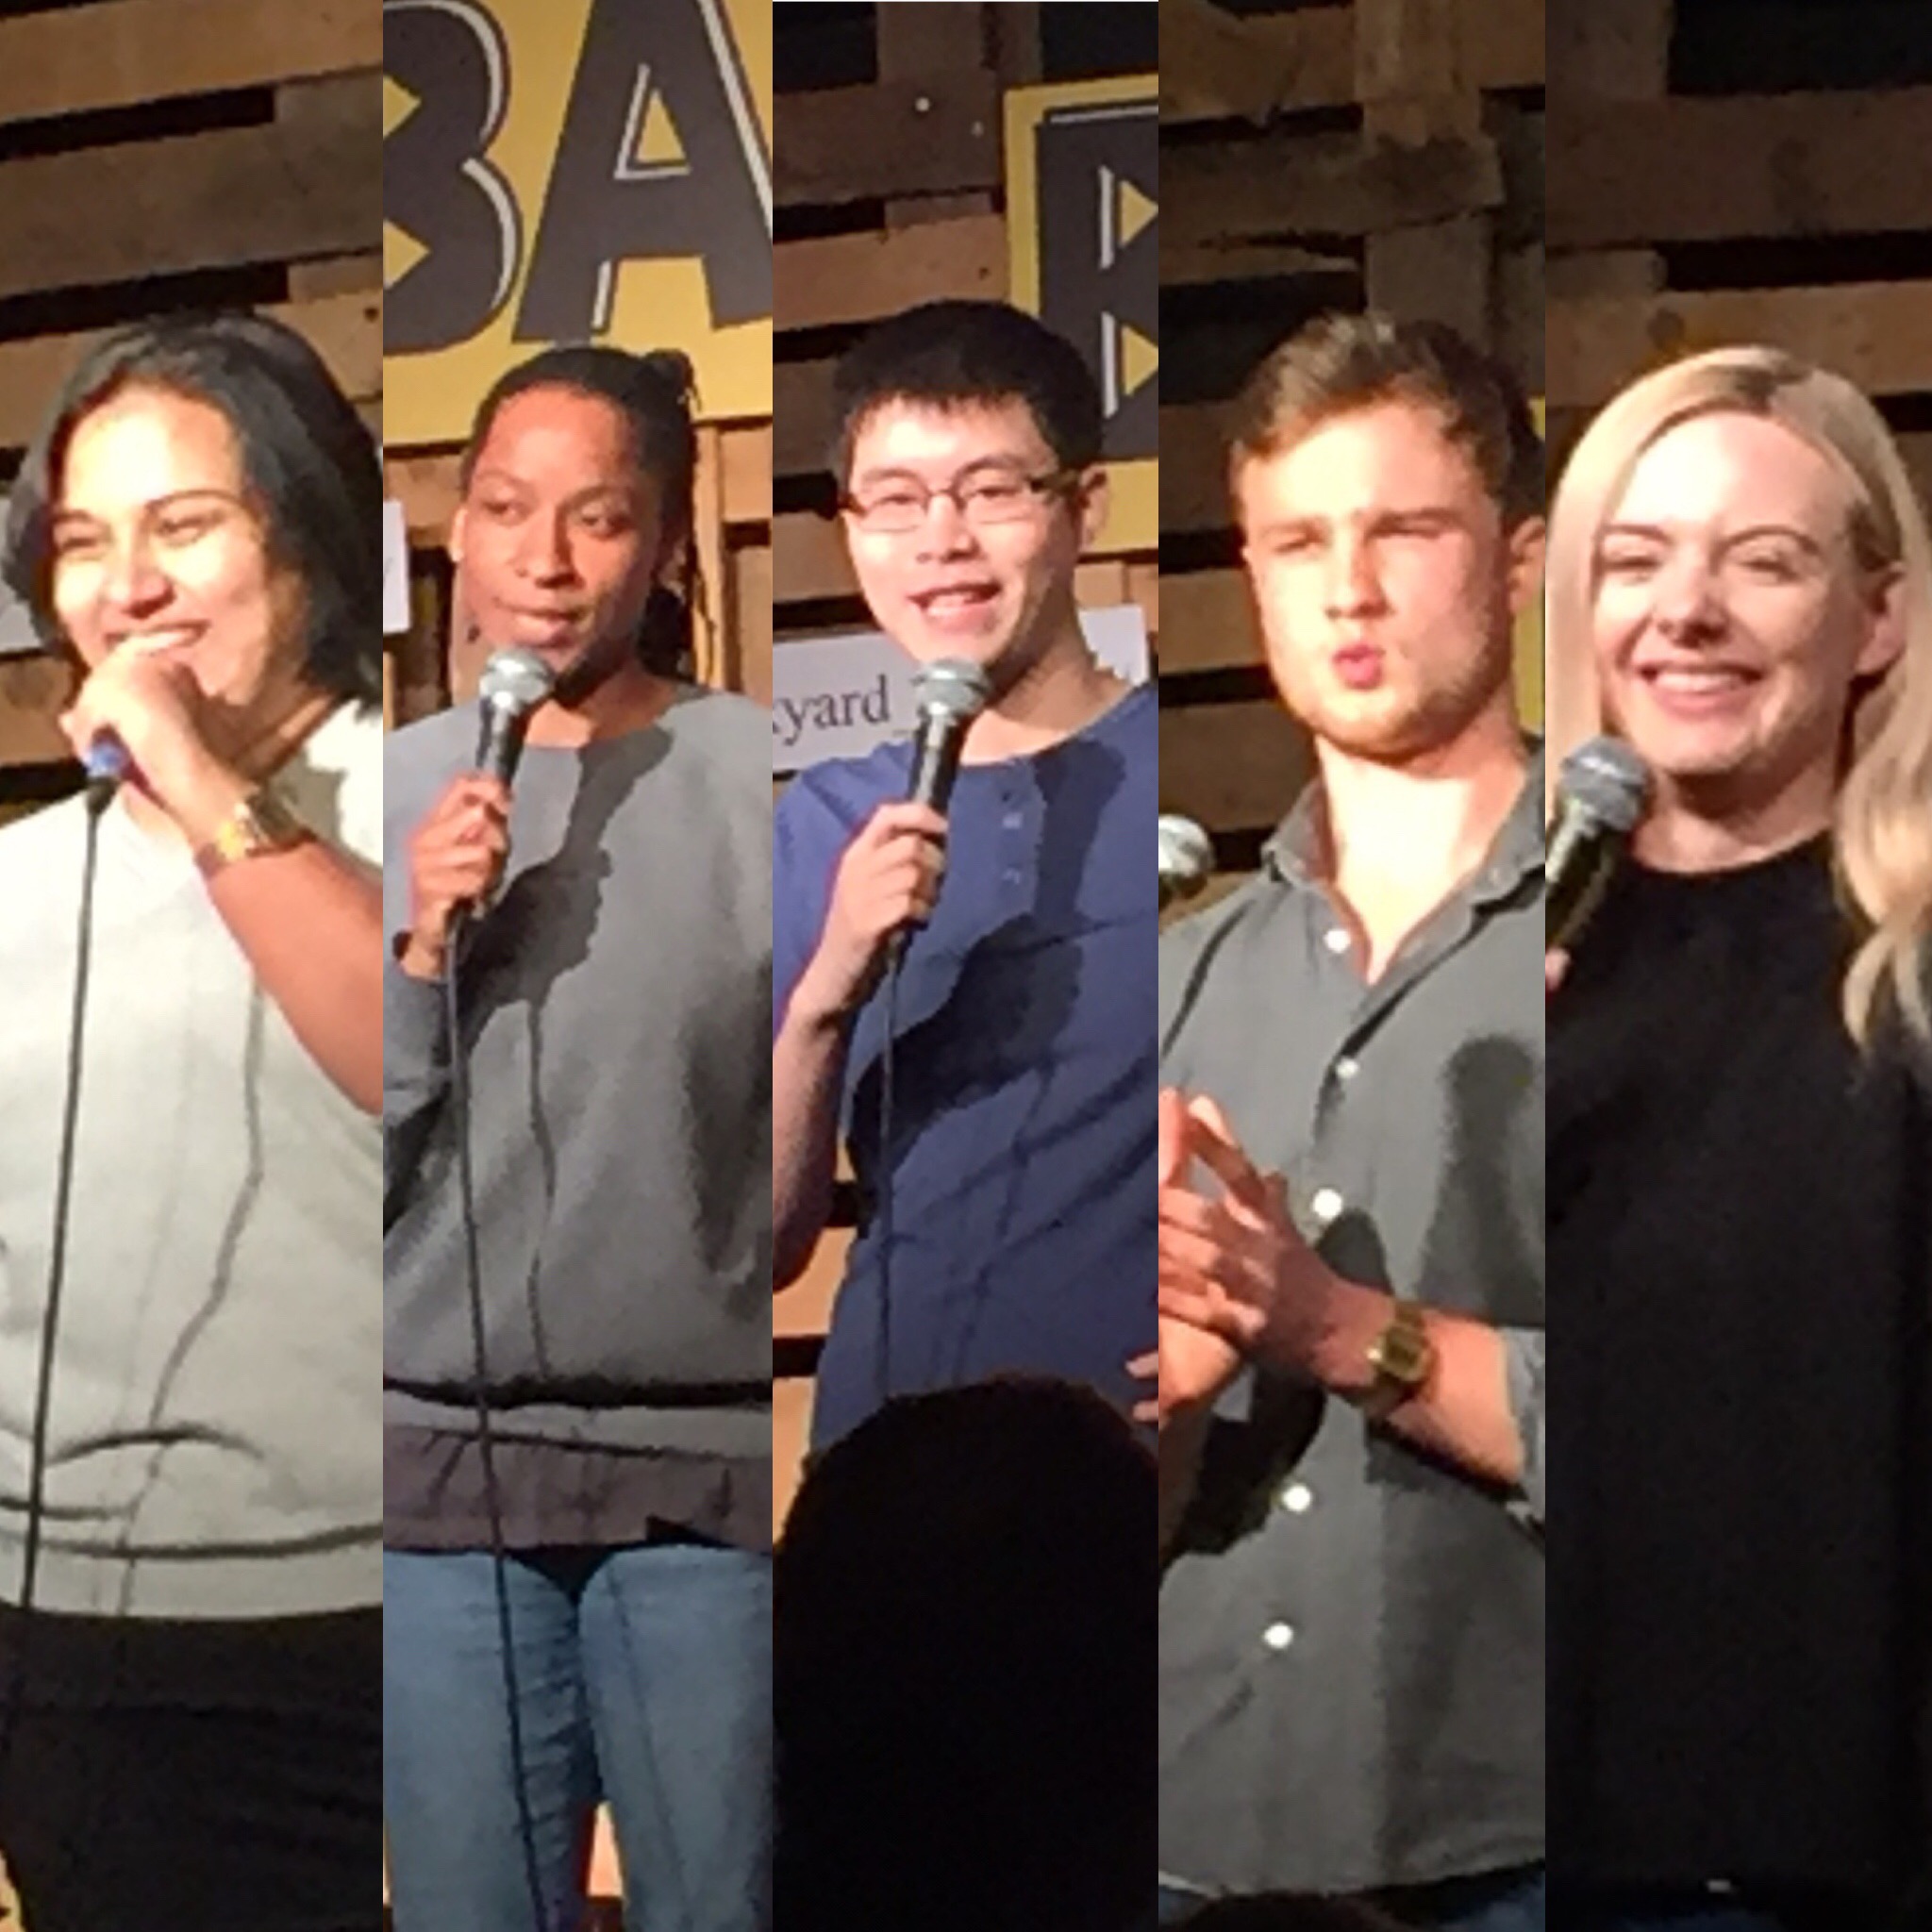 Photo collage of Sukh Ojla, Twayna Mayne, Ken Cheng, Josh Berry and Steff Todd performing at the Backyard Comedy Club